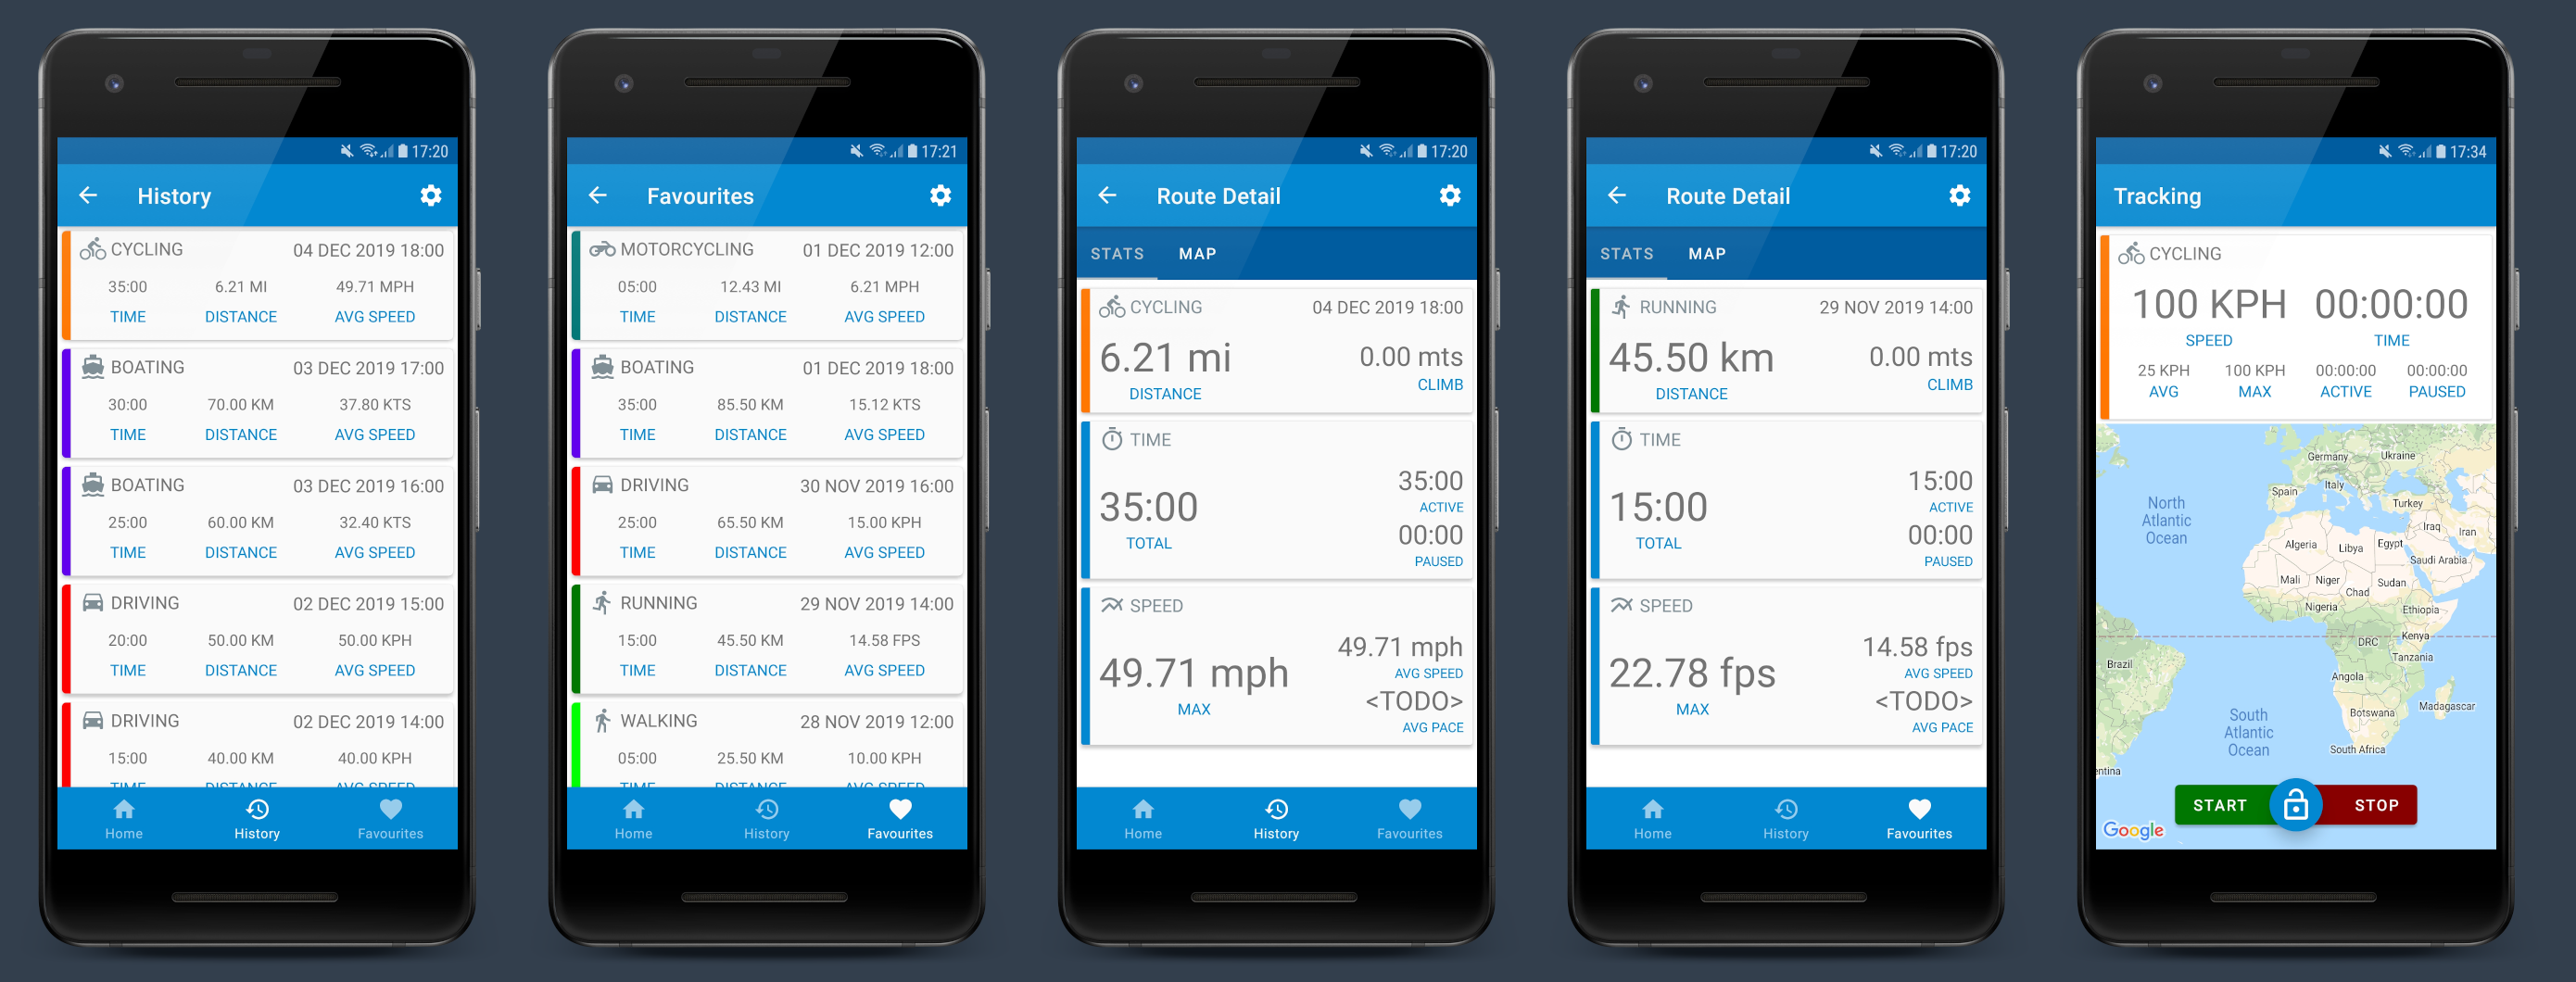 A simple Android Mobile application for logging and mapping road trips